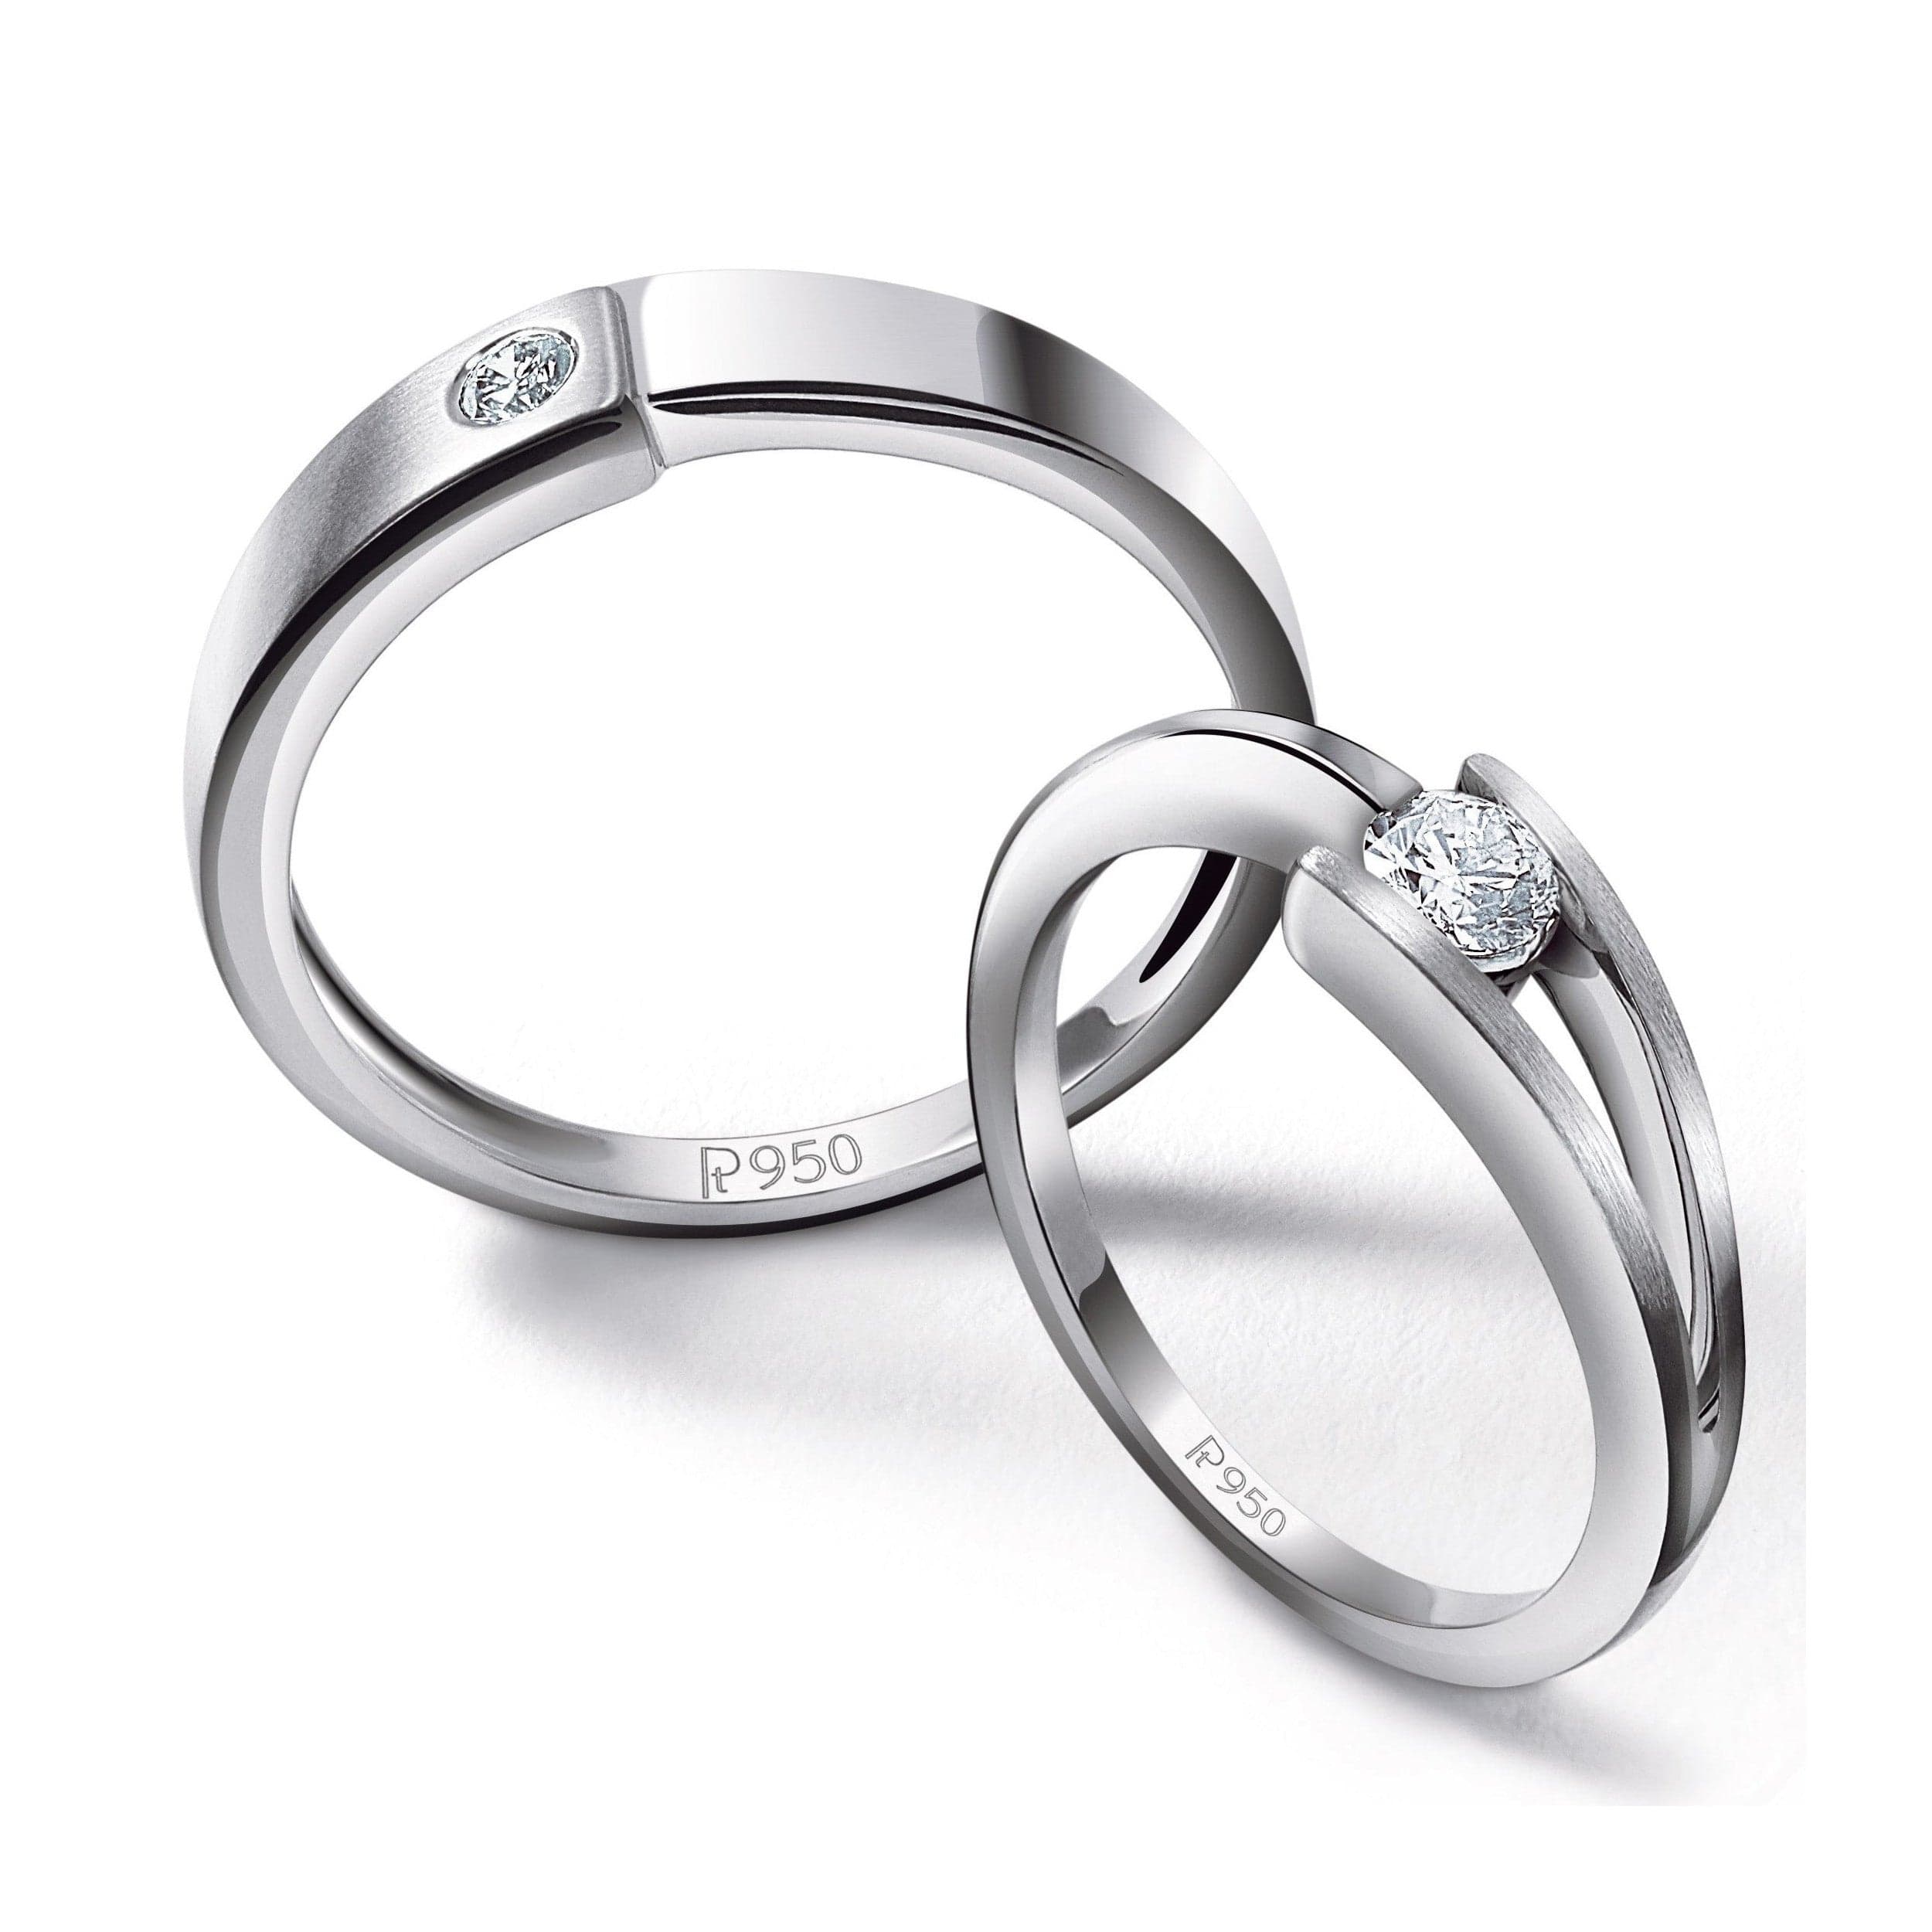 JewelMaze Platinum Plated Couple Ring For Girls And Boys